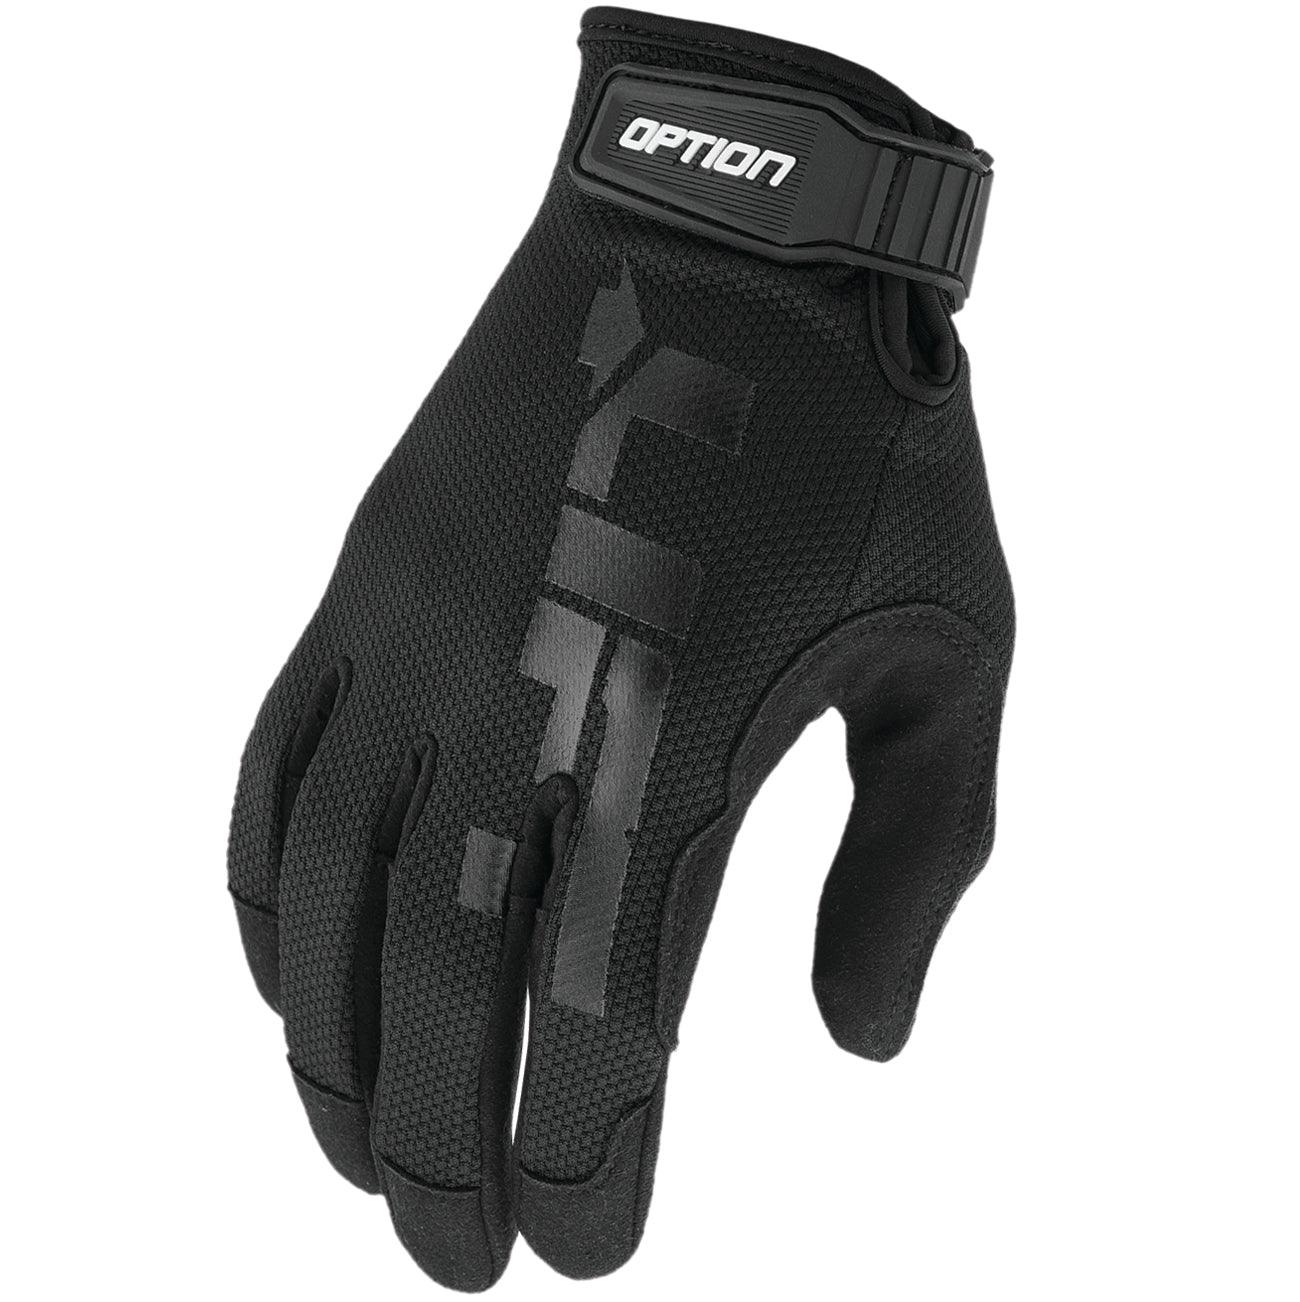 OPTION GLOVE (BLACK) - Purpose-Built / Home of the Trades